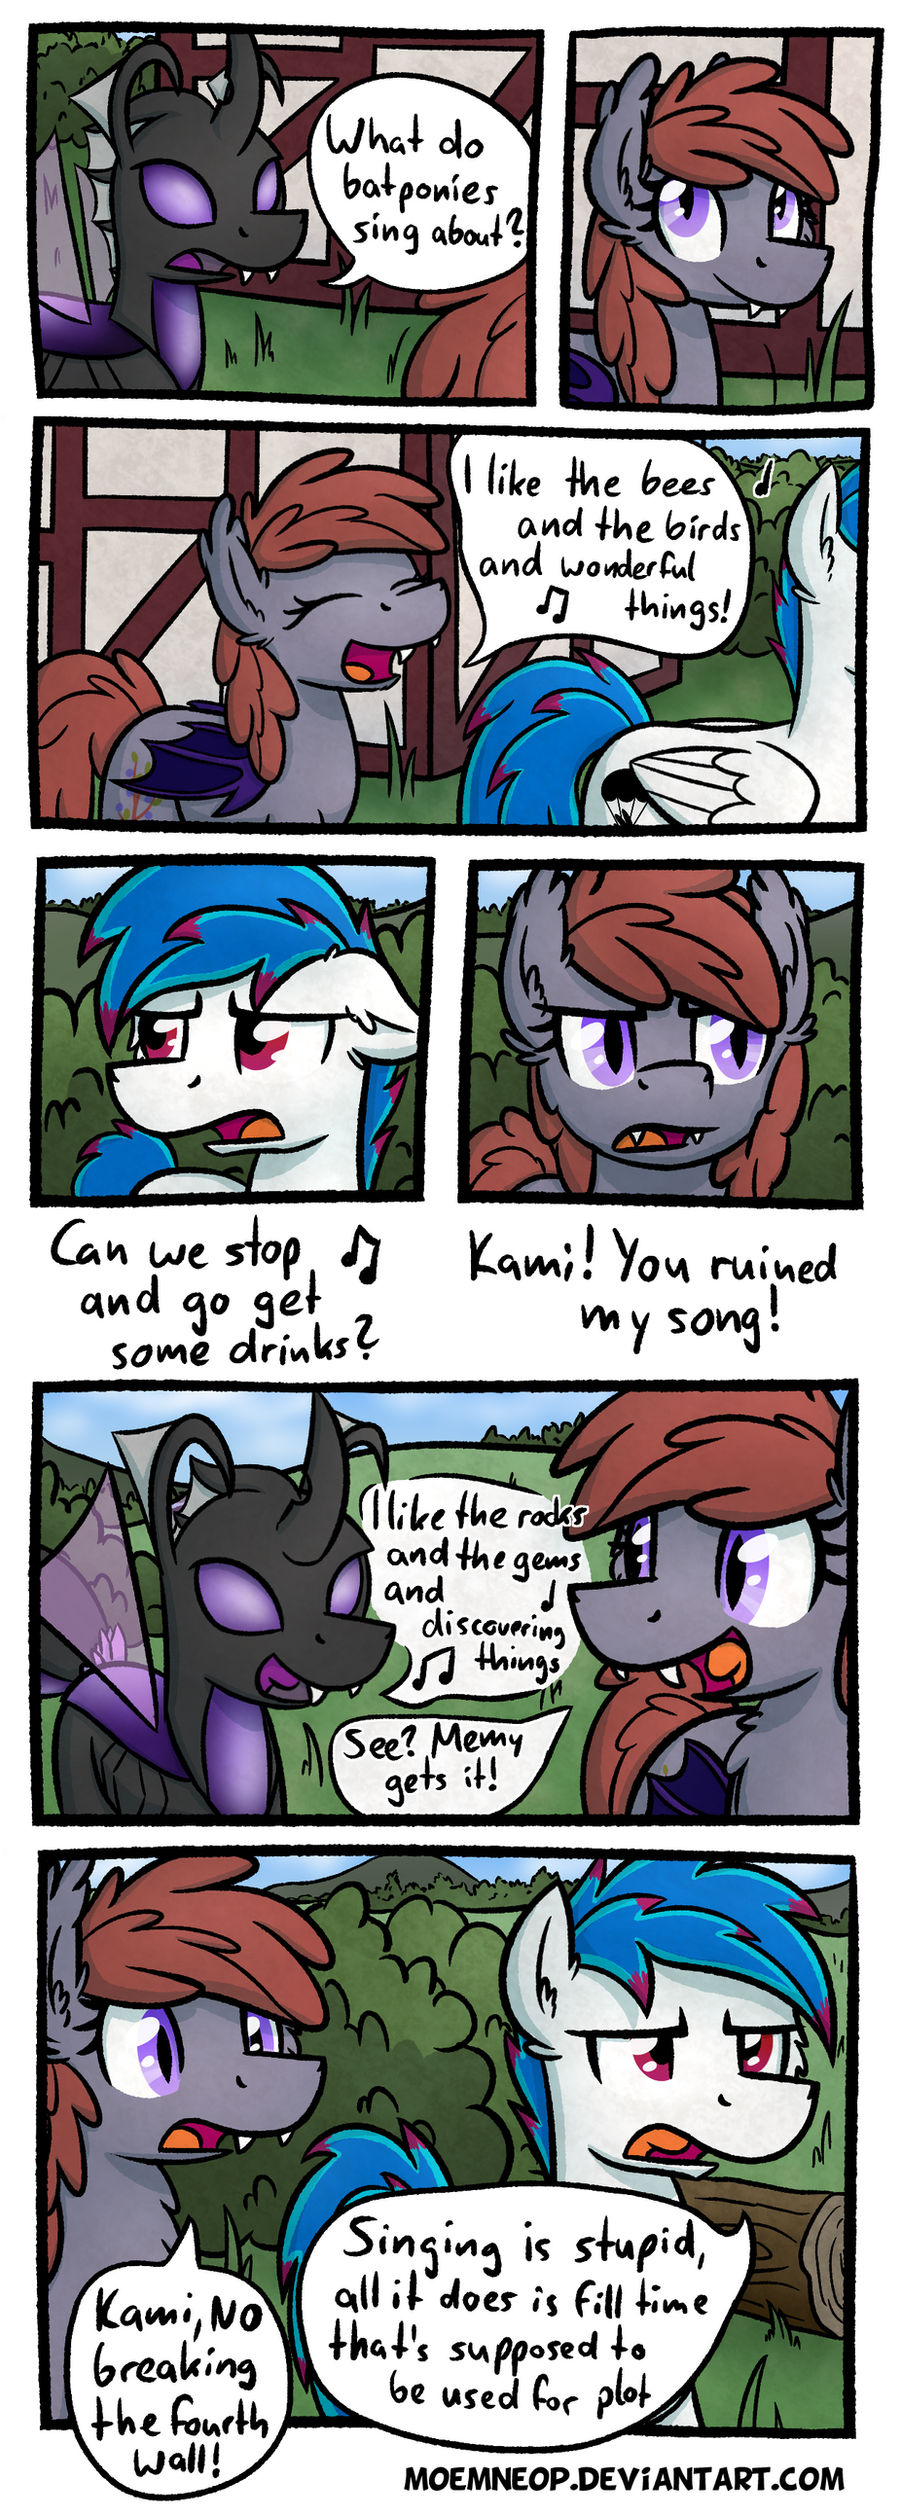 What do batponies sing about?